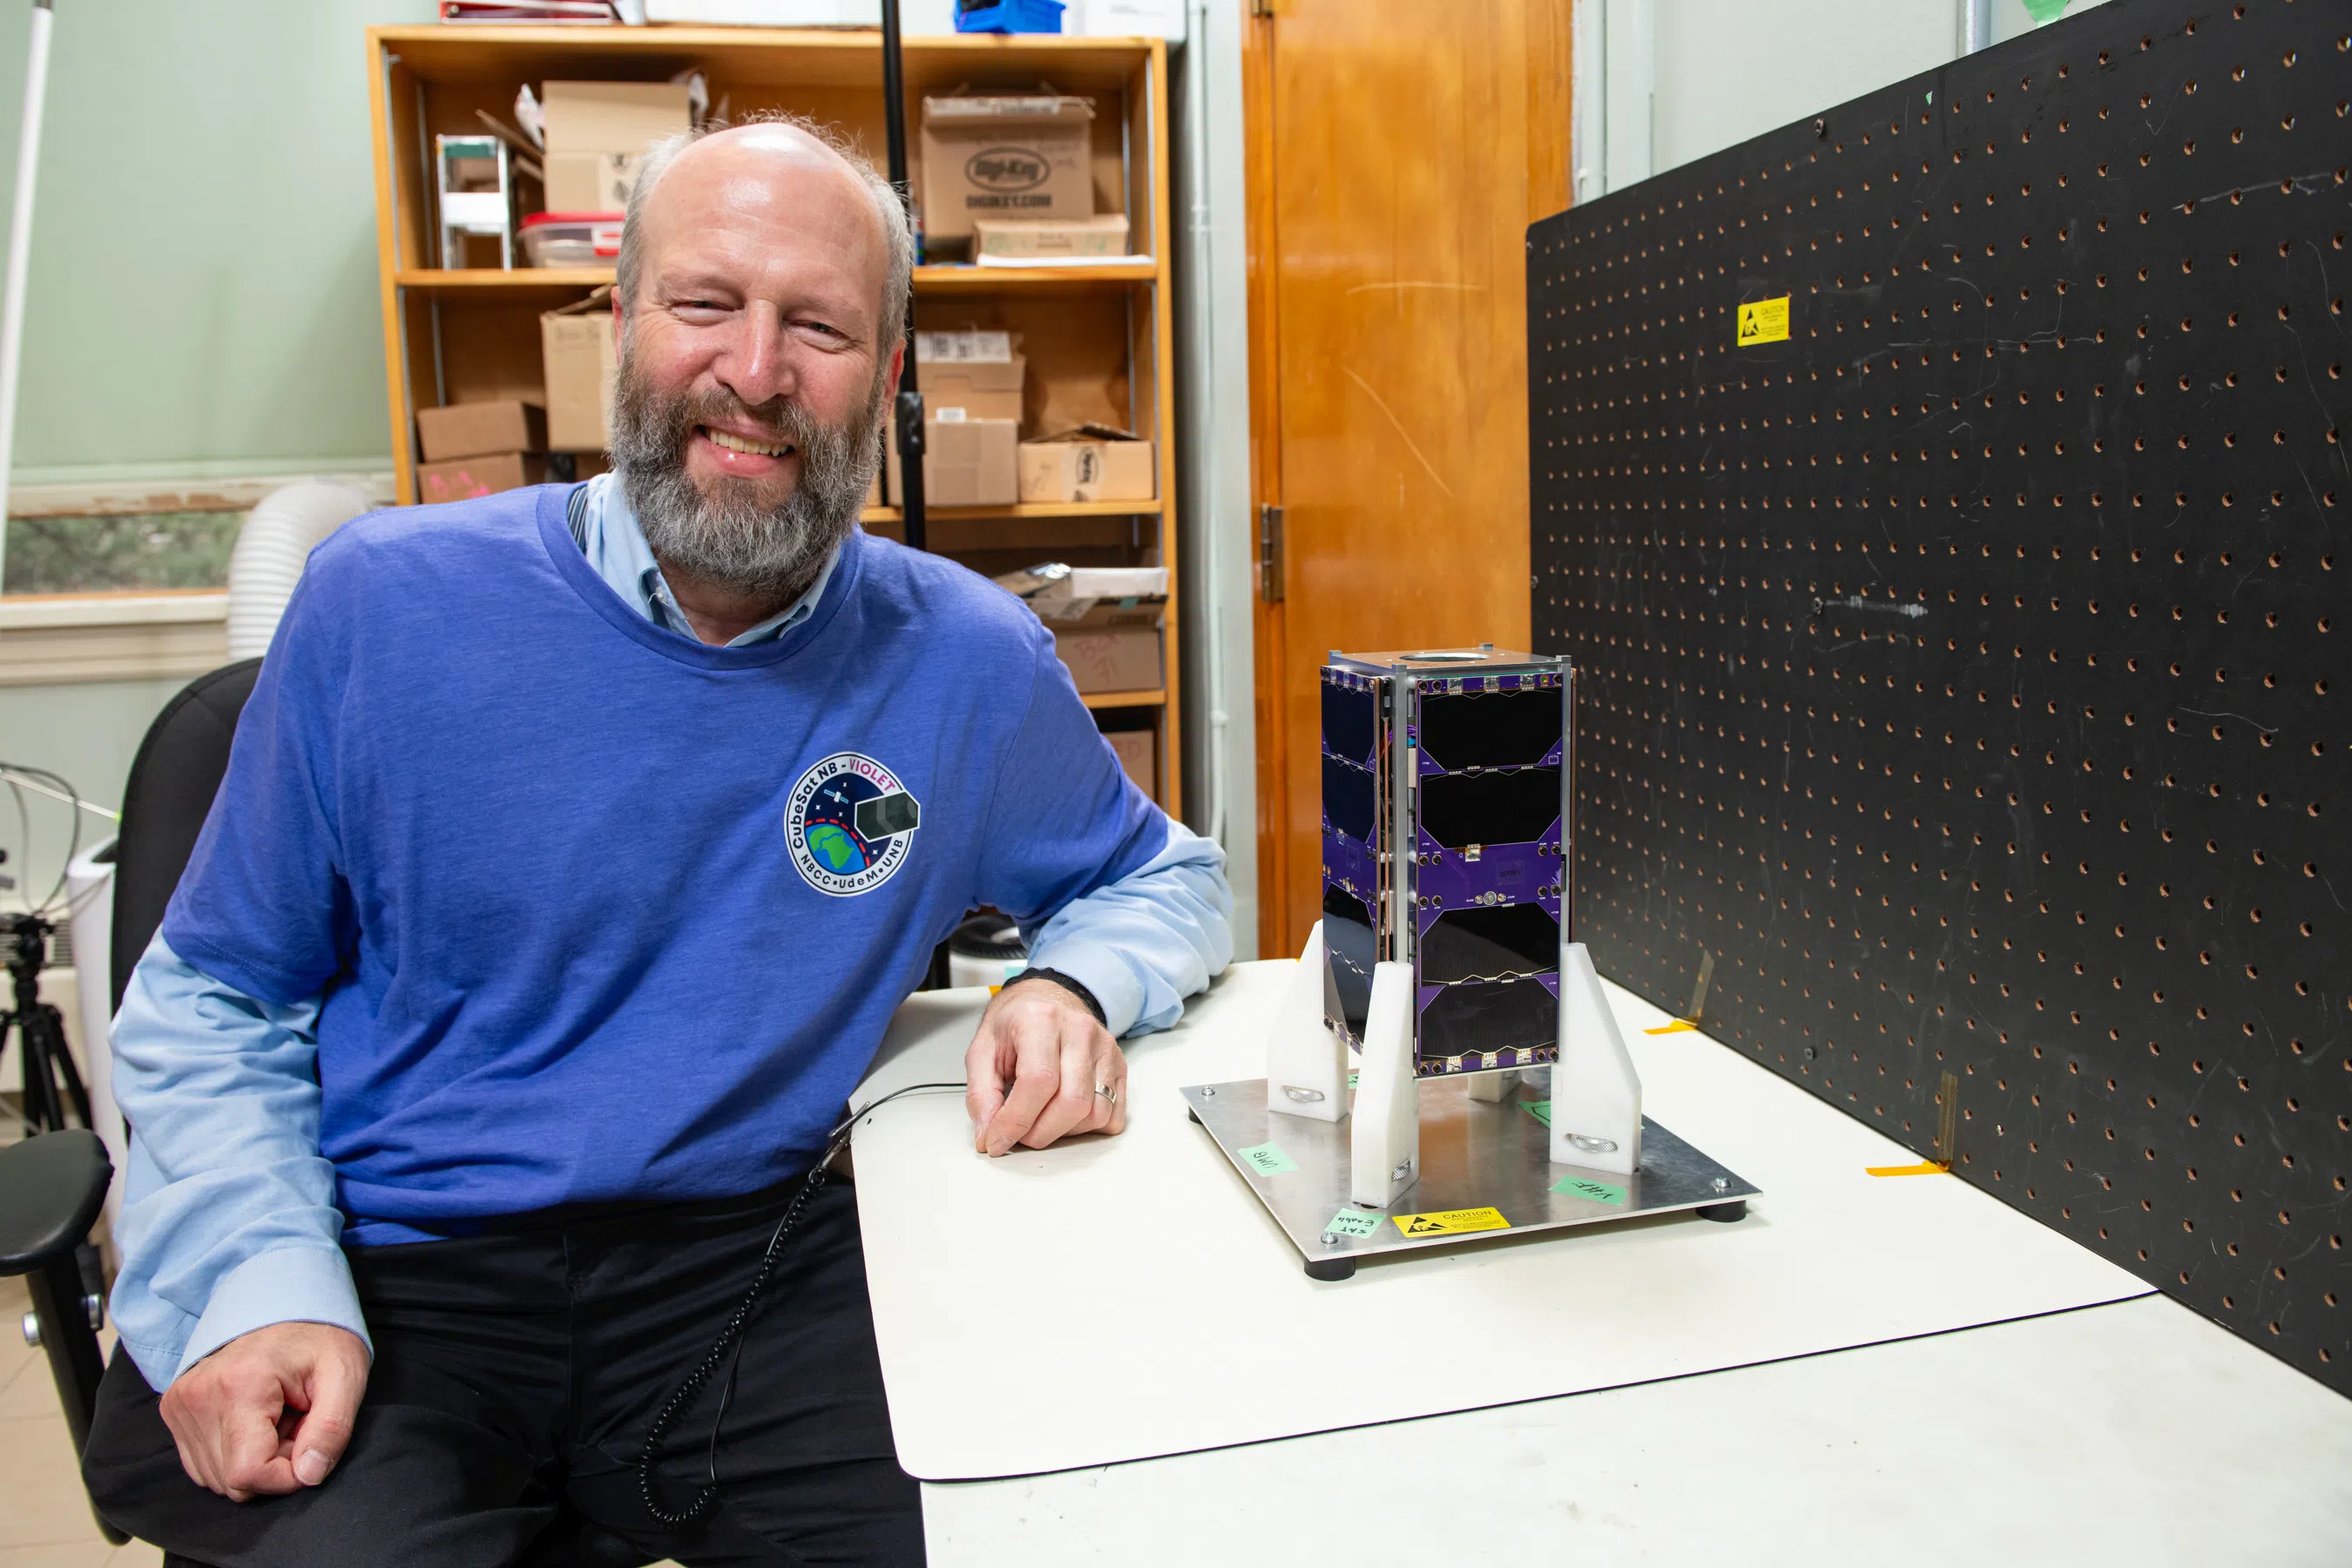 UNB to launch province's first satellite into space